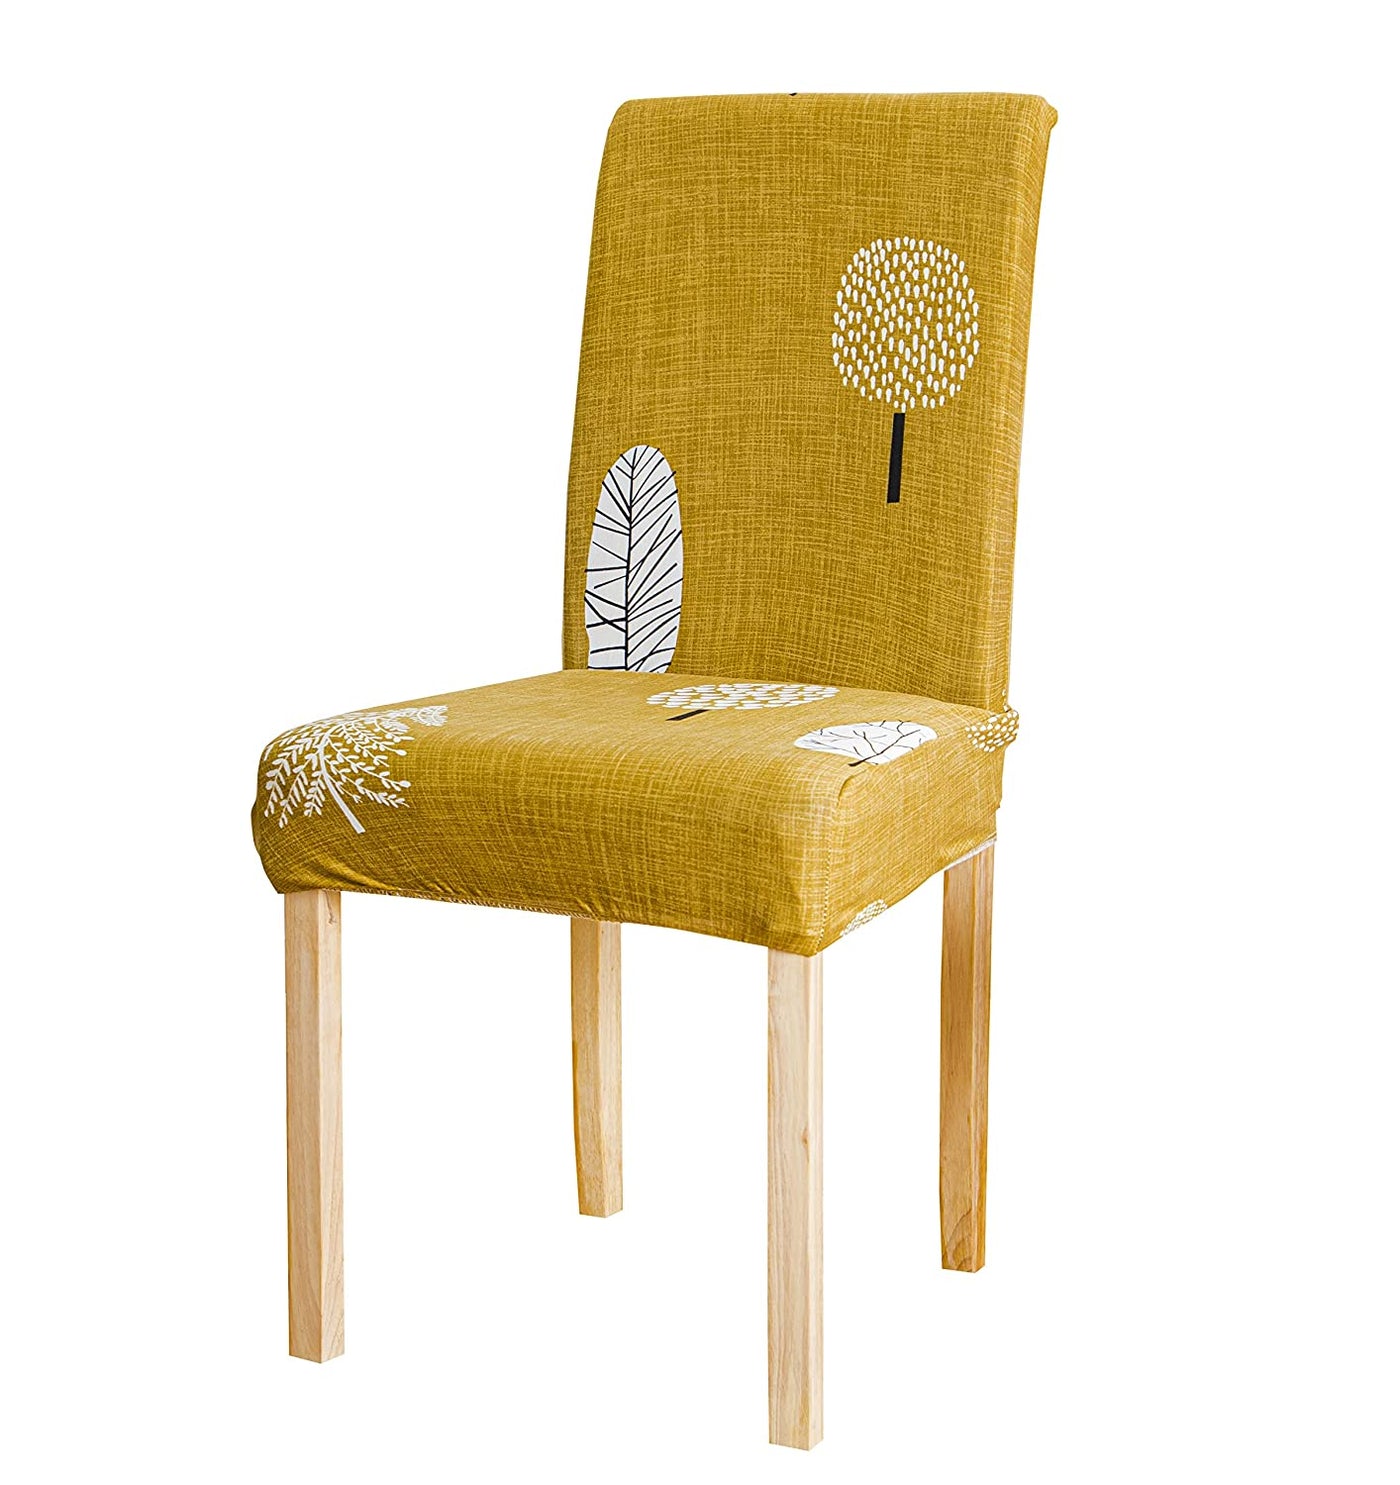 Printed Chair Cover - Mustard Flower